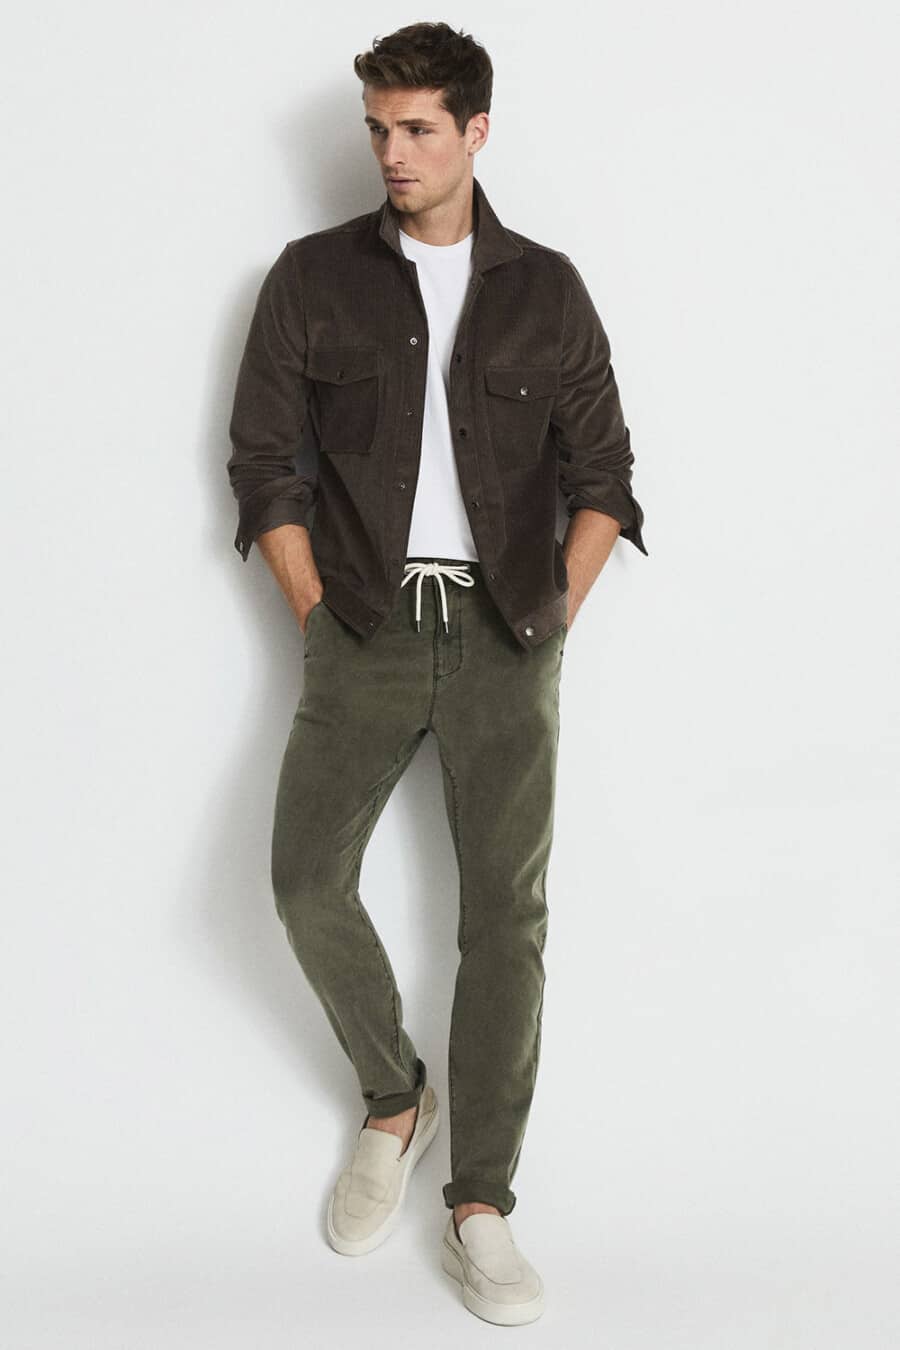 Men's dark green drawstring pants, white T-shirt, brown overshirt and stone suede loafers outfit